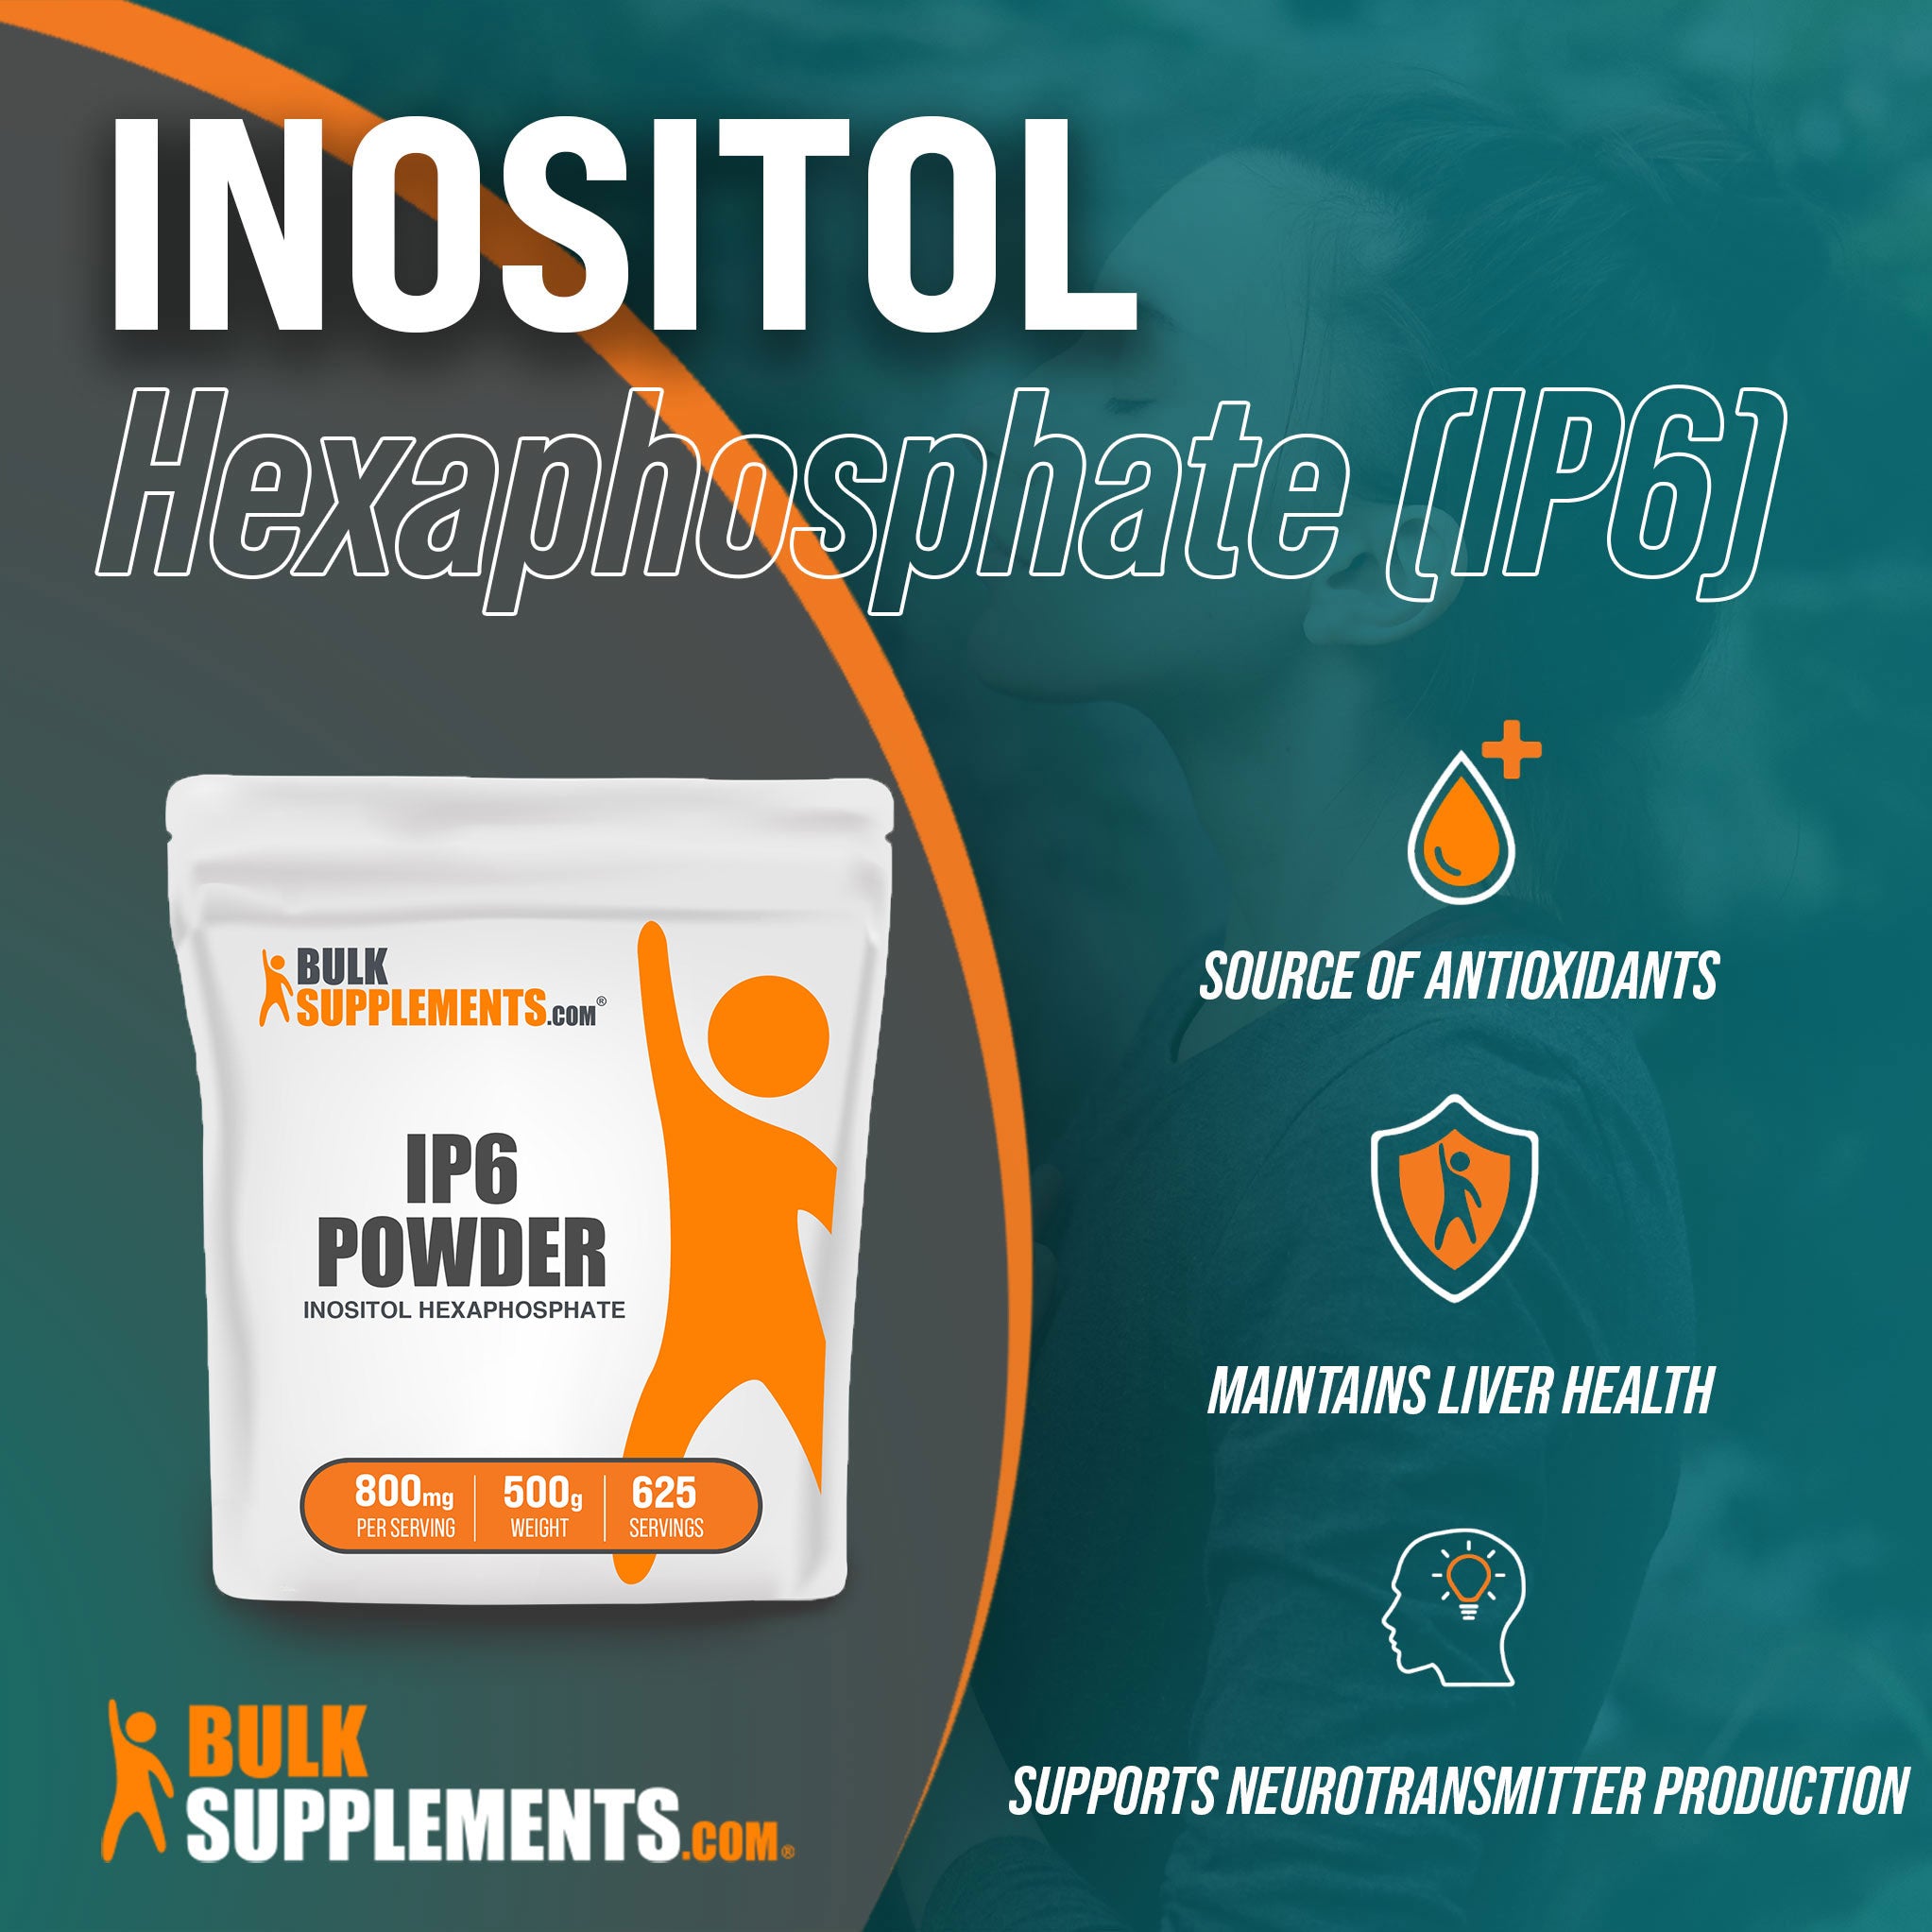 Benefits of Inositol Hexaphosphate IP6; source of antioxidants, maintains liver health, supports neurotransmitter production